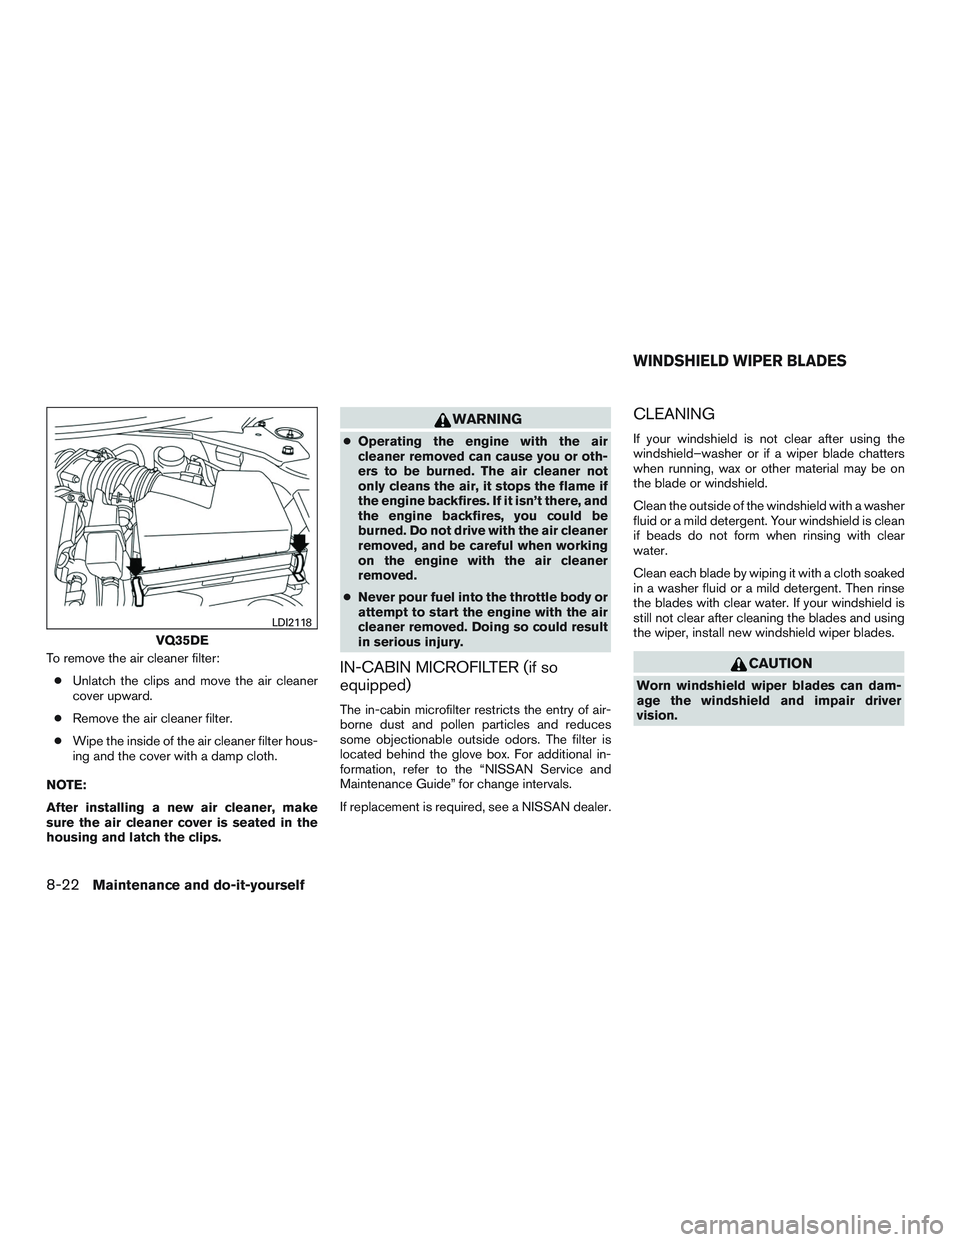 NISSAN ALTIMA SEDAN 2015  Owners Manual To remove the air cleaner filter:● Unlatch the clips and move the air cleaner
cover upward.
● Remove the air cleaner filter.
● Wipe the inside of the air cleaner filter hous-
ing and the cover w